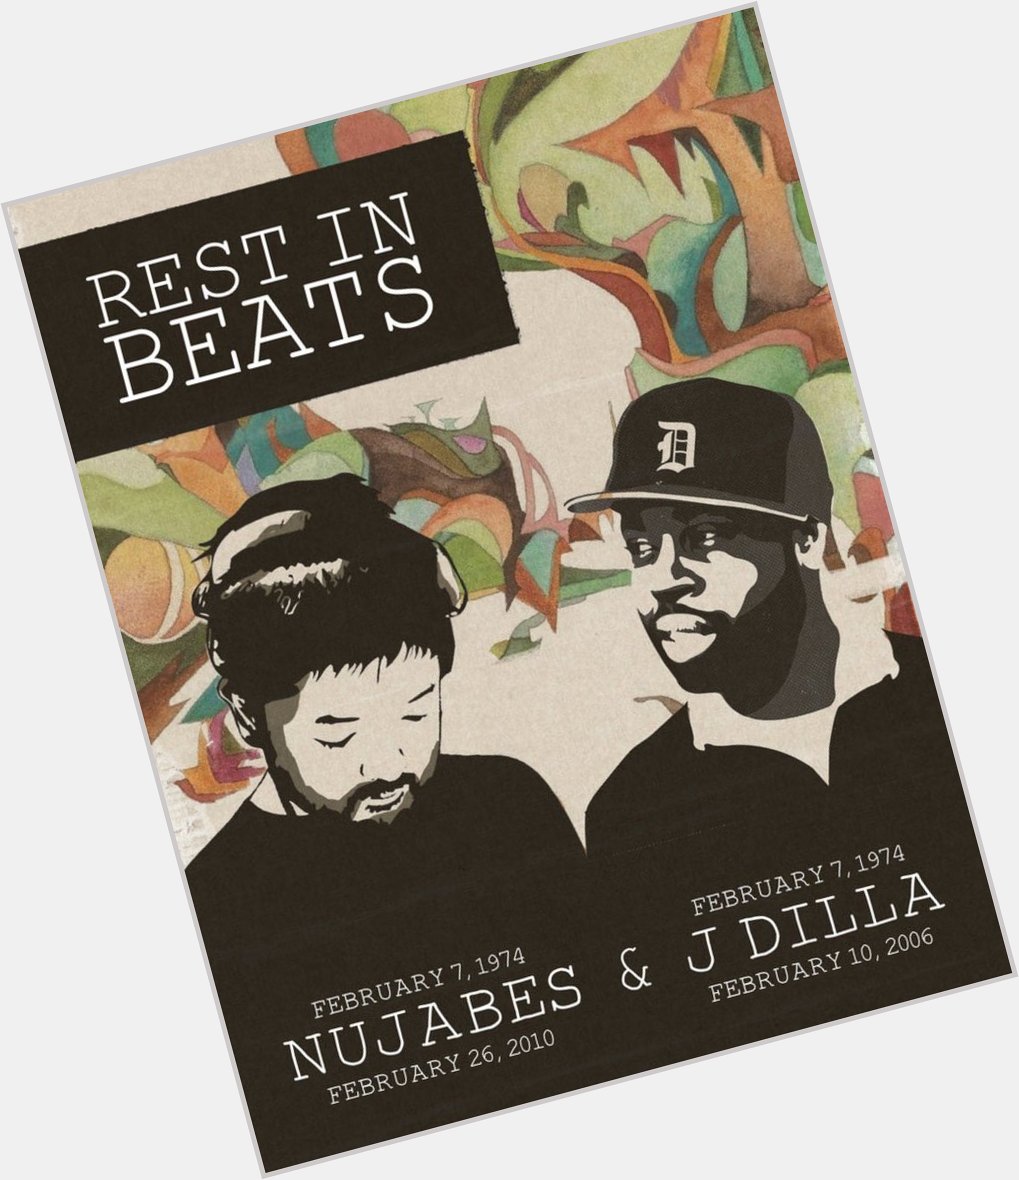 Happy Birthday to my favorite beat makers J.Dilla and Nujabes your music will live on R.I.P 